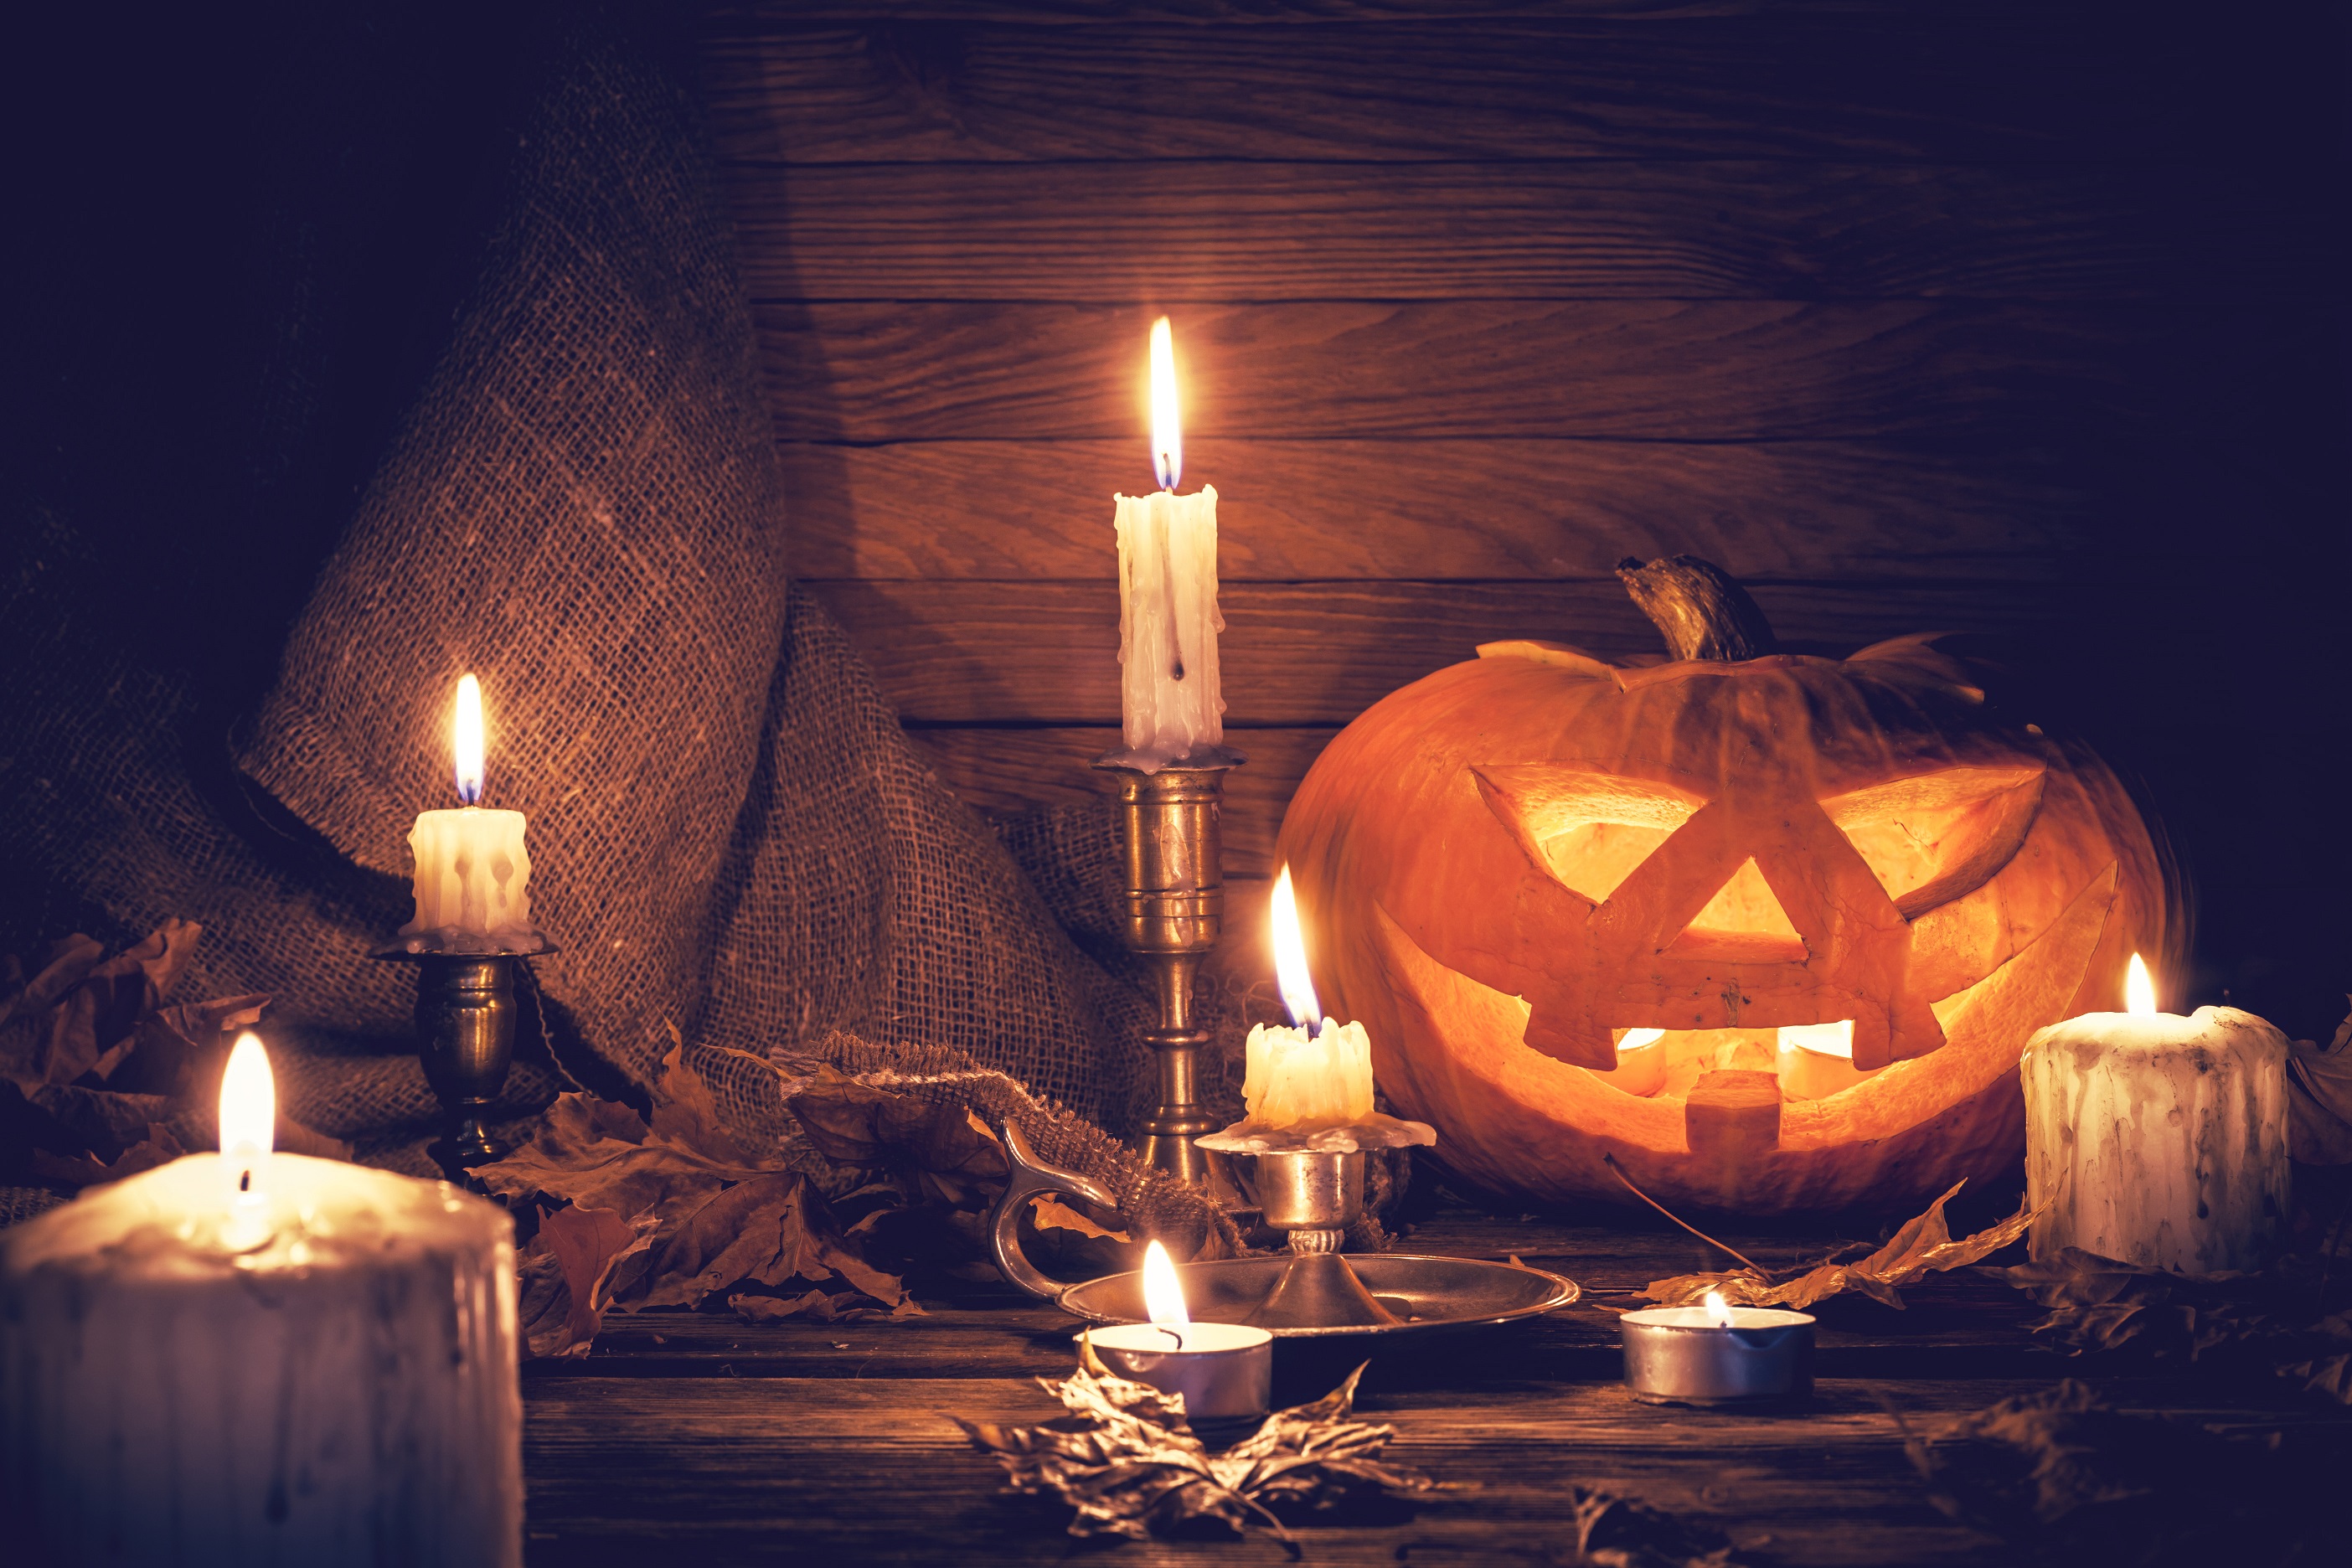 Halloween Deals & Discounts For Him That Will Make Him Fall Head Over Heels For You